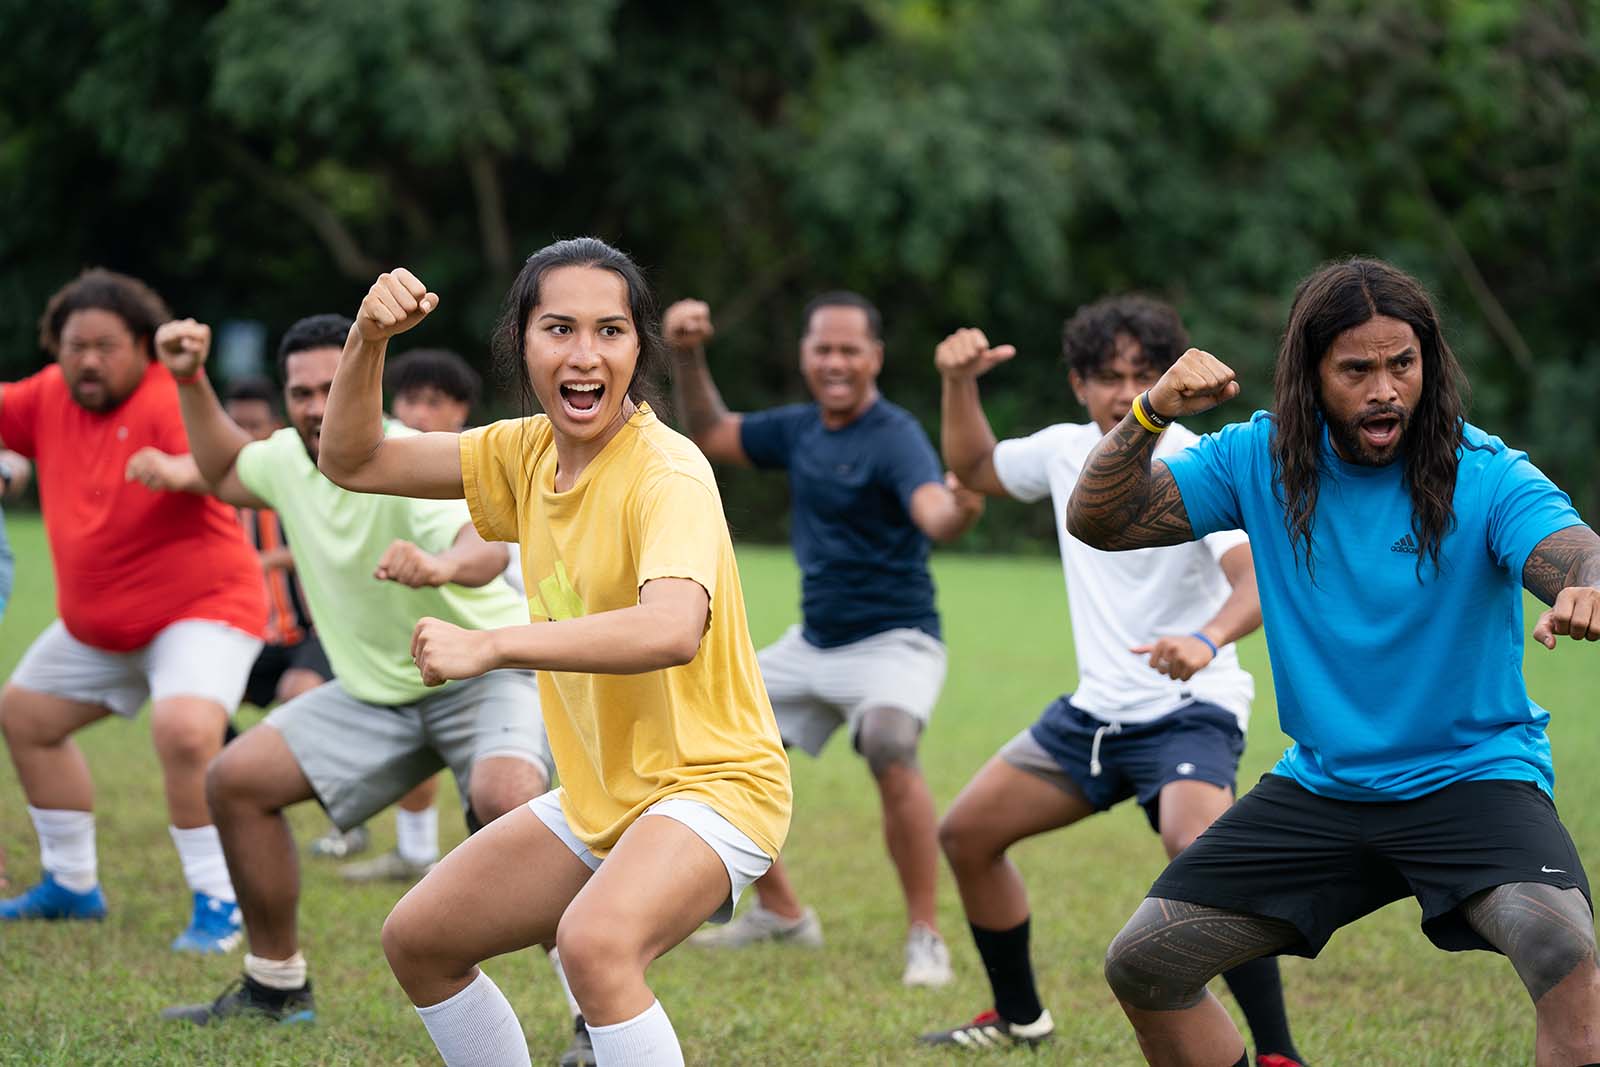 Fa'afafine athlete Jaiyah Saelua (Kaimana) was the first non-binary soccer player to compete in a FIFA World Cup Qualifier. Image © Searchlight Pictures